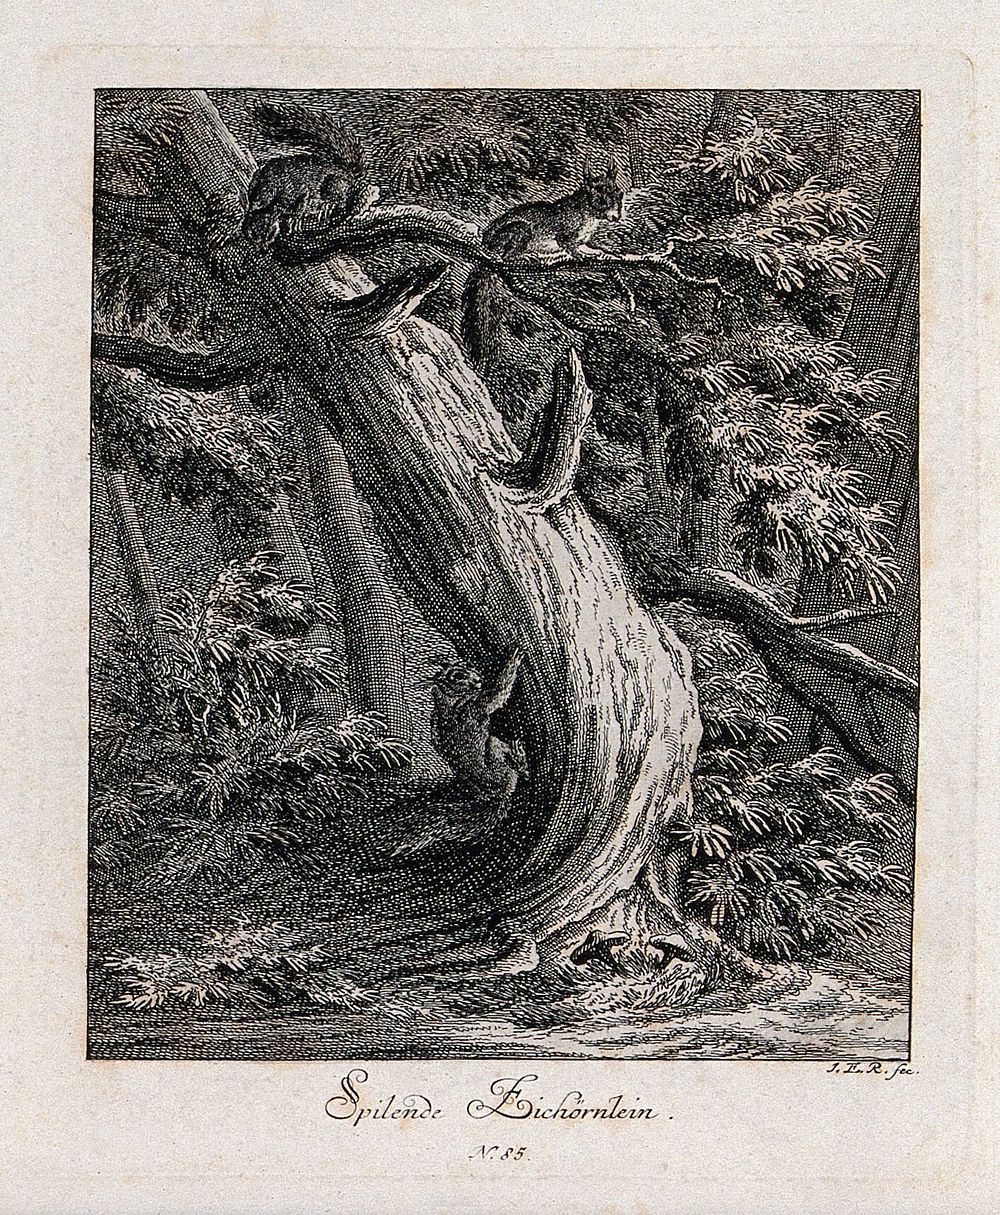 Two red squirrels playing on a tree in a forest. Etching by J. E. Ridinger.